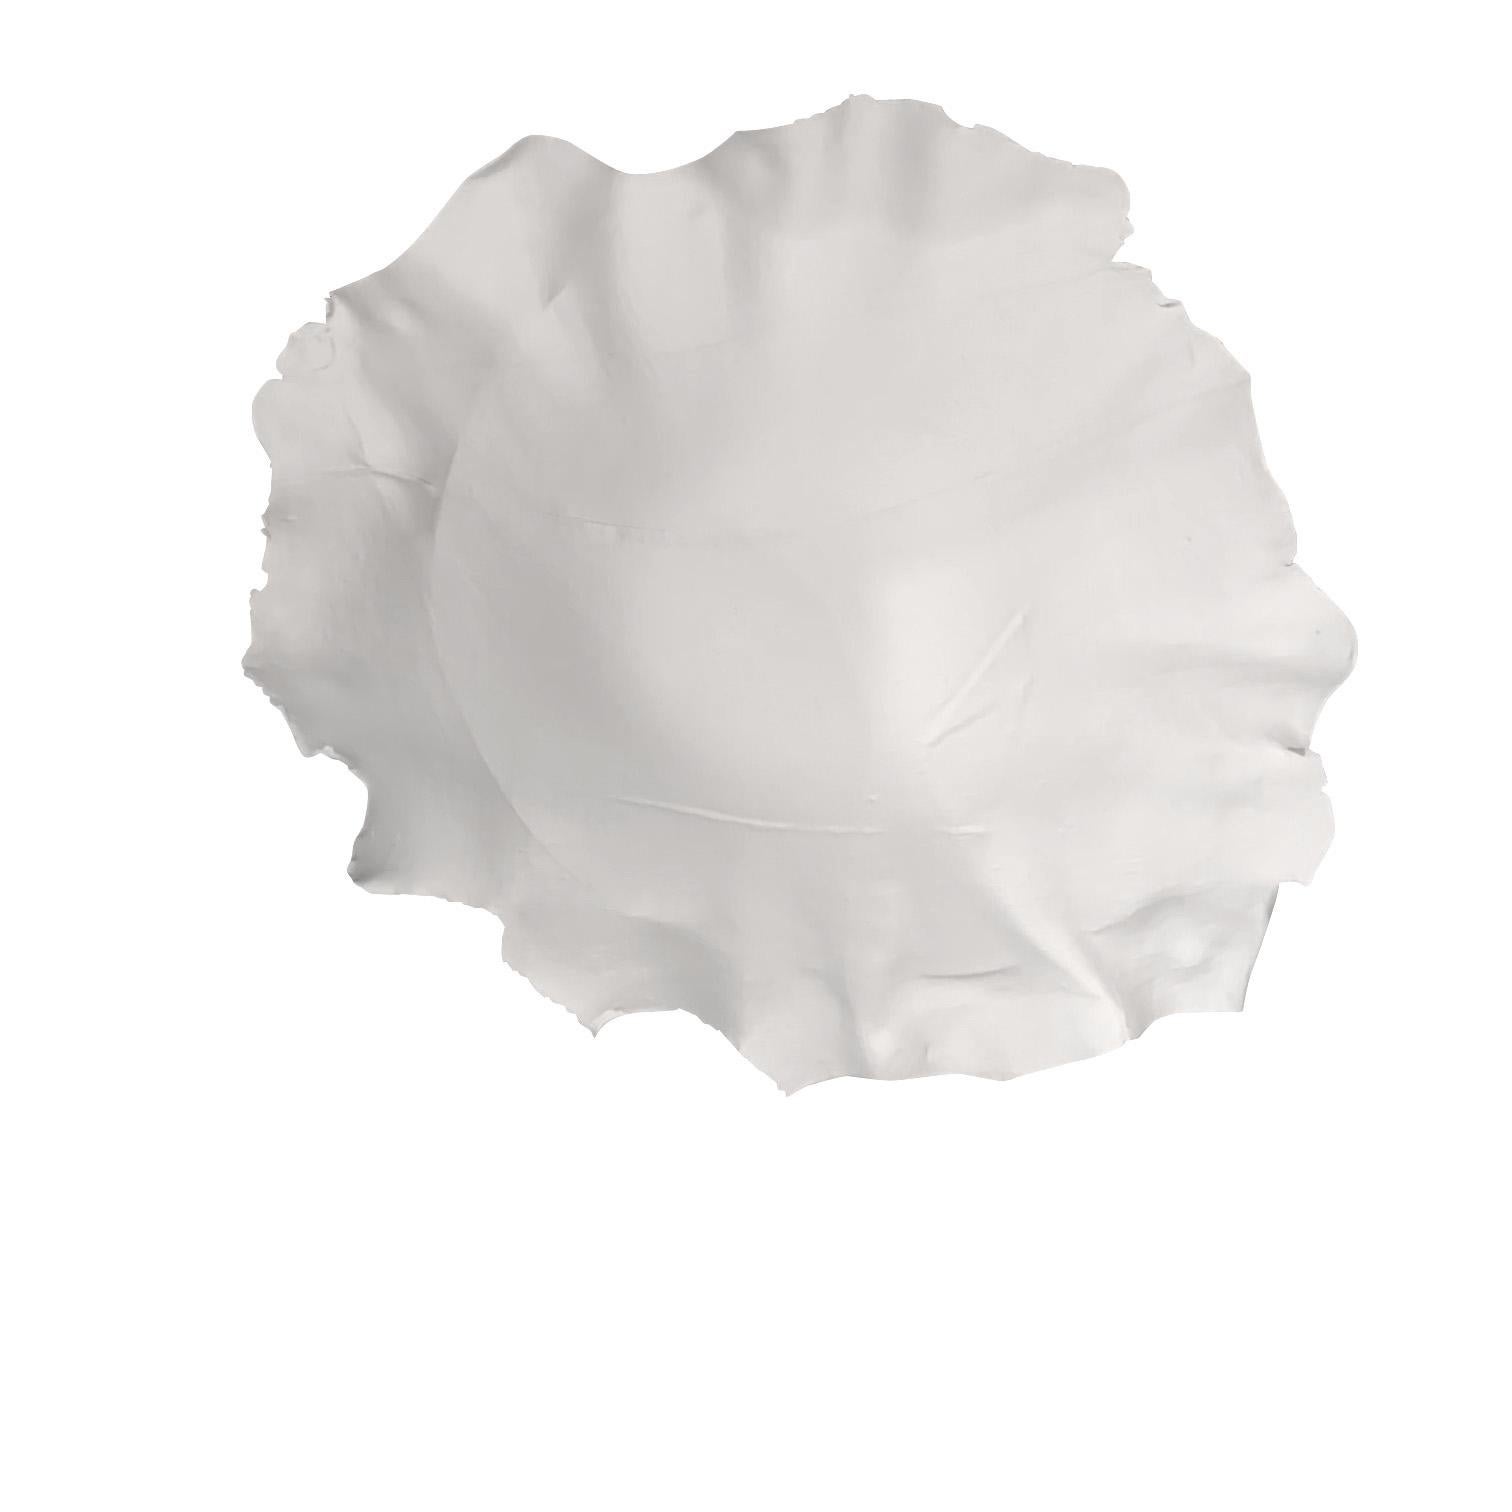 Contemporary French handmade white porcelain bowl with a linen textured look
Decorative rough edges
Can hold food.